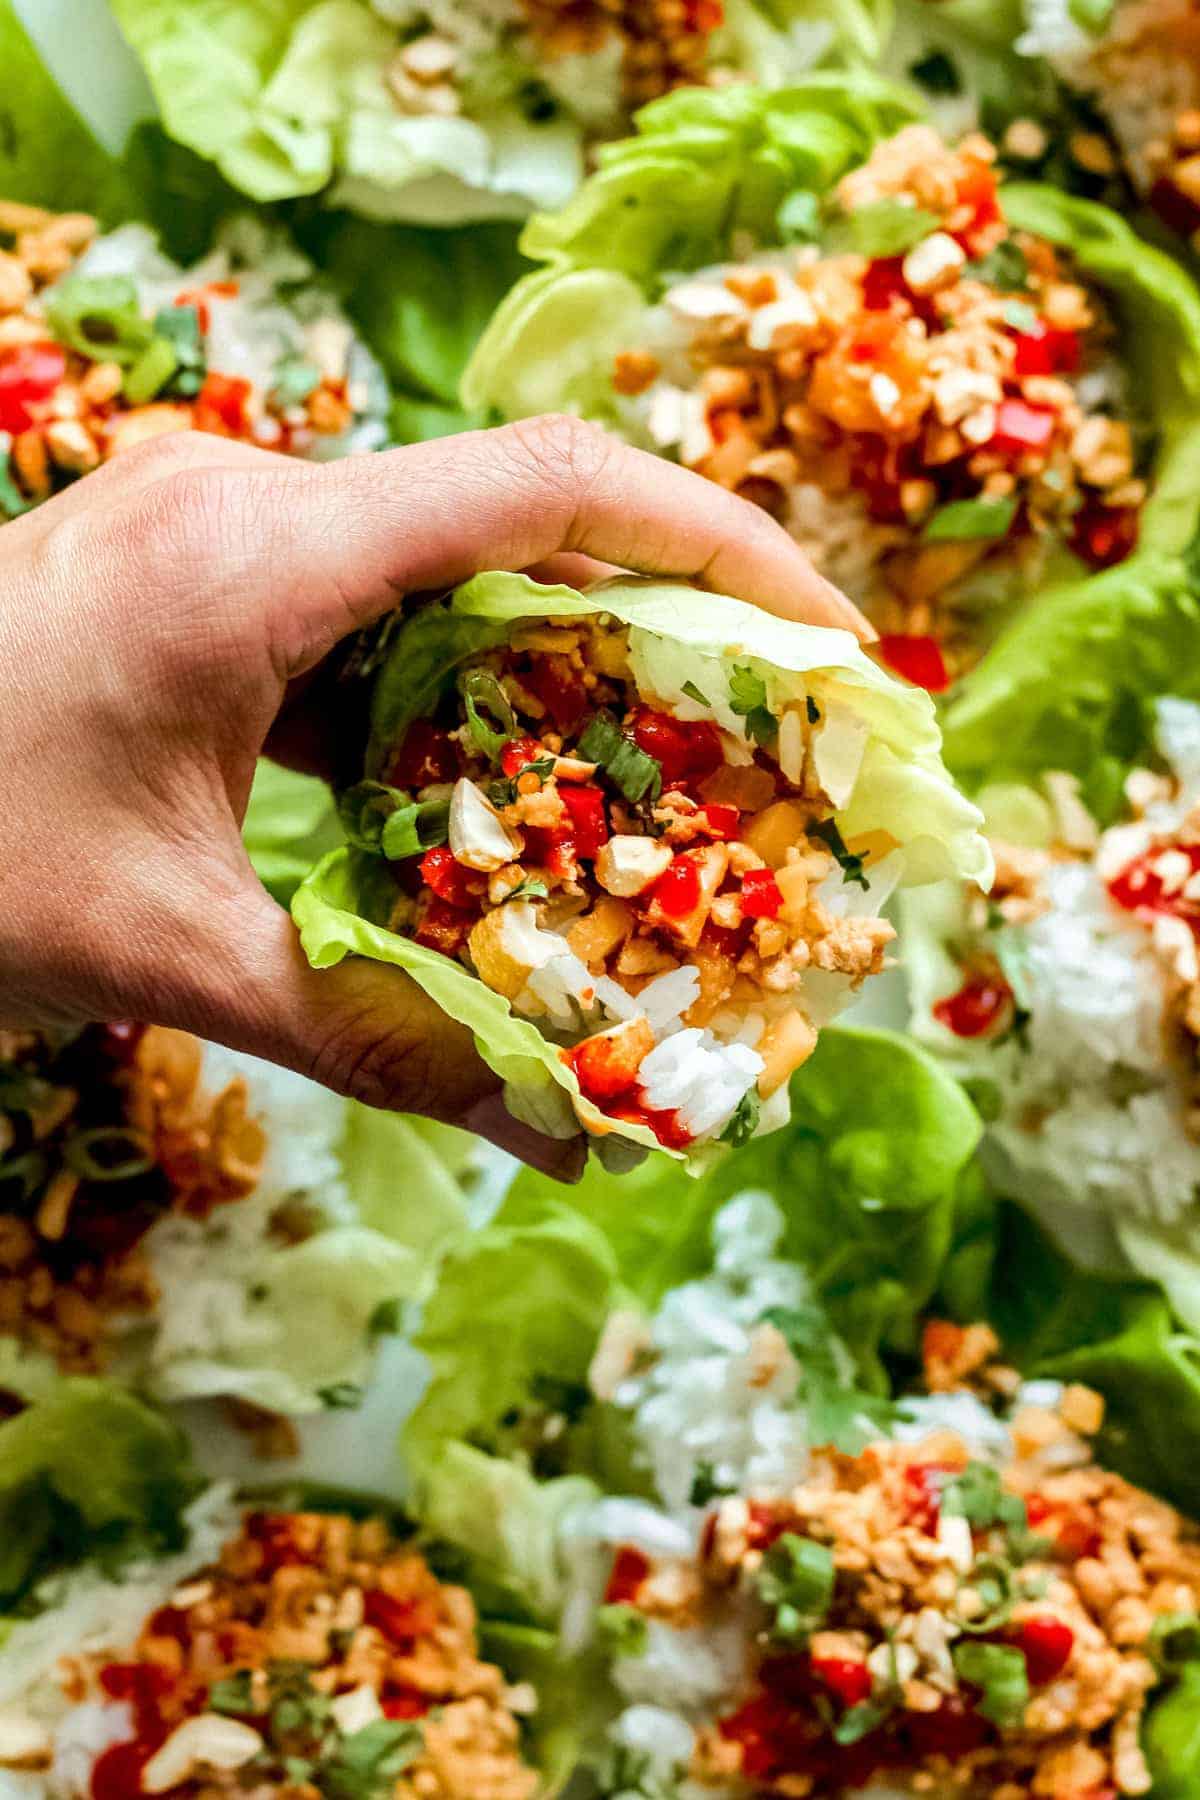 A chicken lettuce wrap being held towards camera